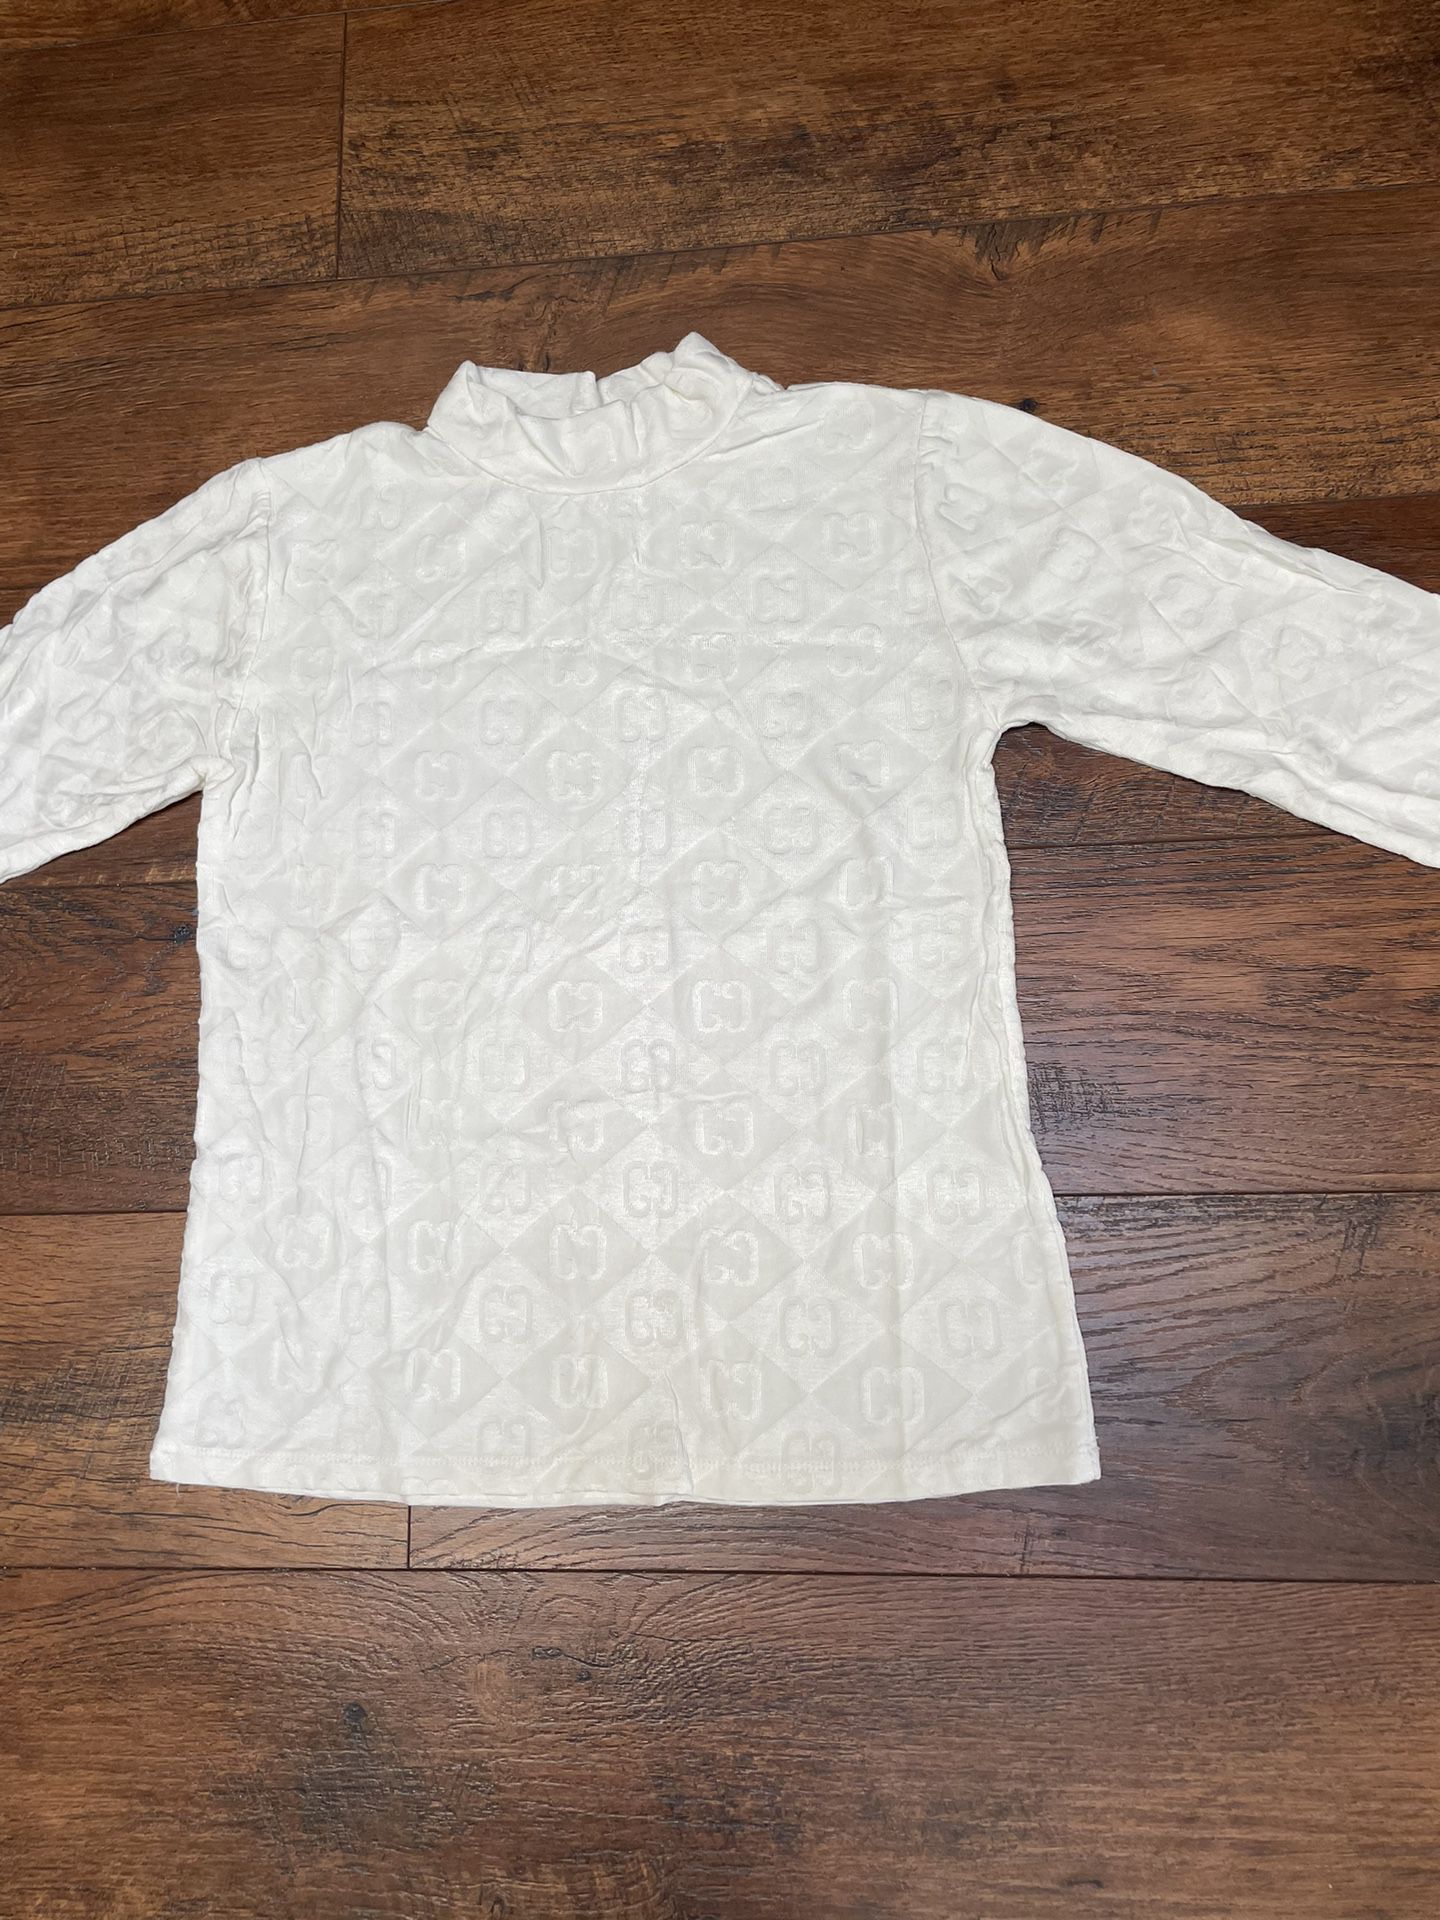 Turtle 🐢 Neck White Shirt 🌺❤️🛍️🥰Plz Look More Beautiful Styles 🌺❤️🥰❤️🛍️